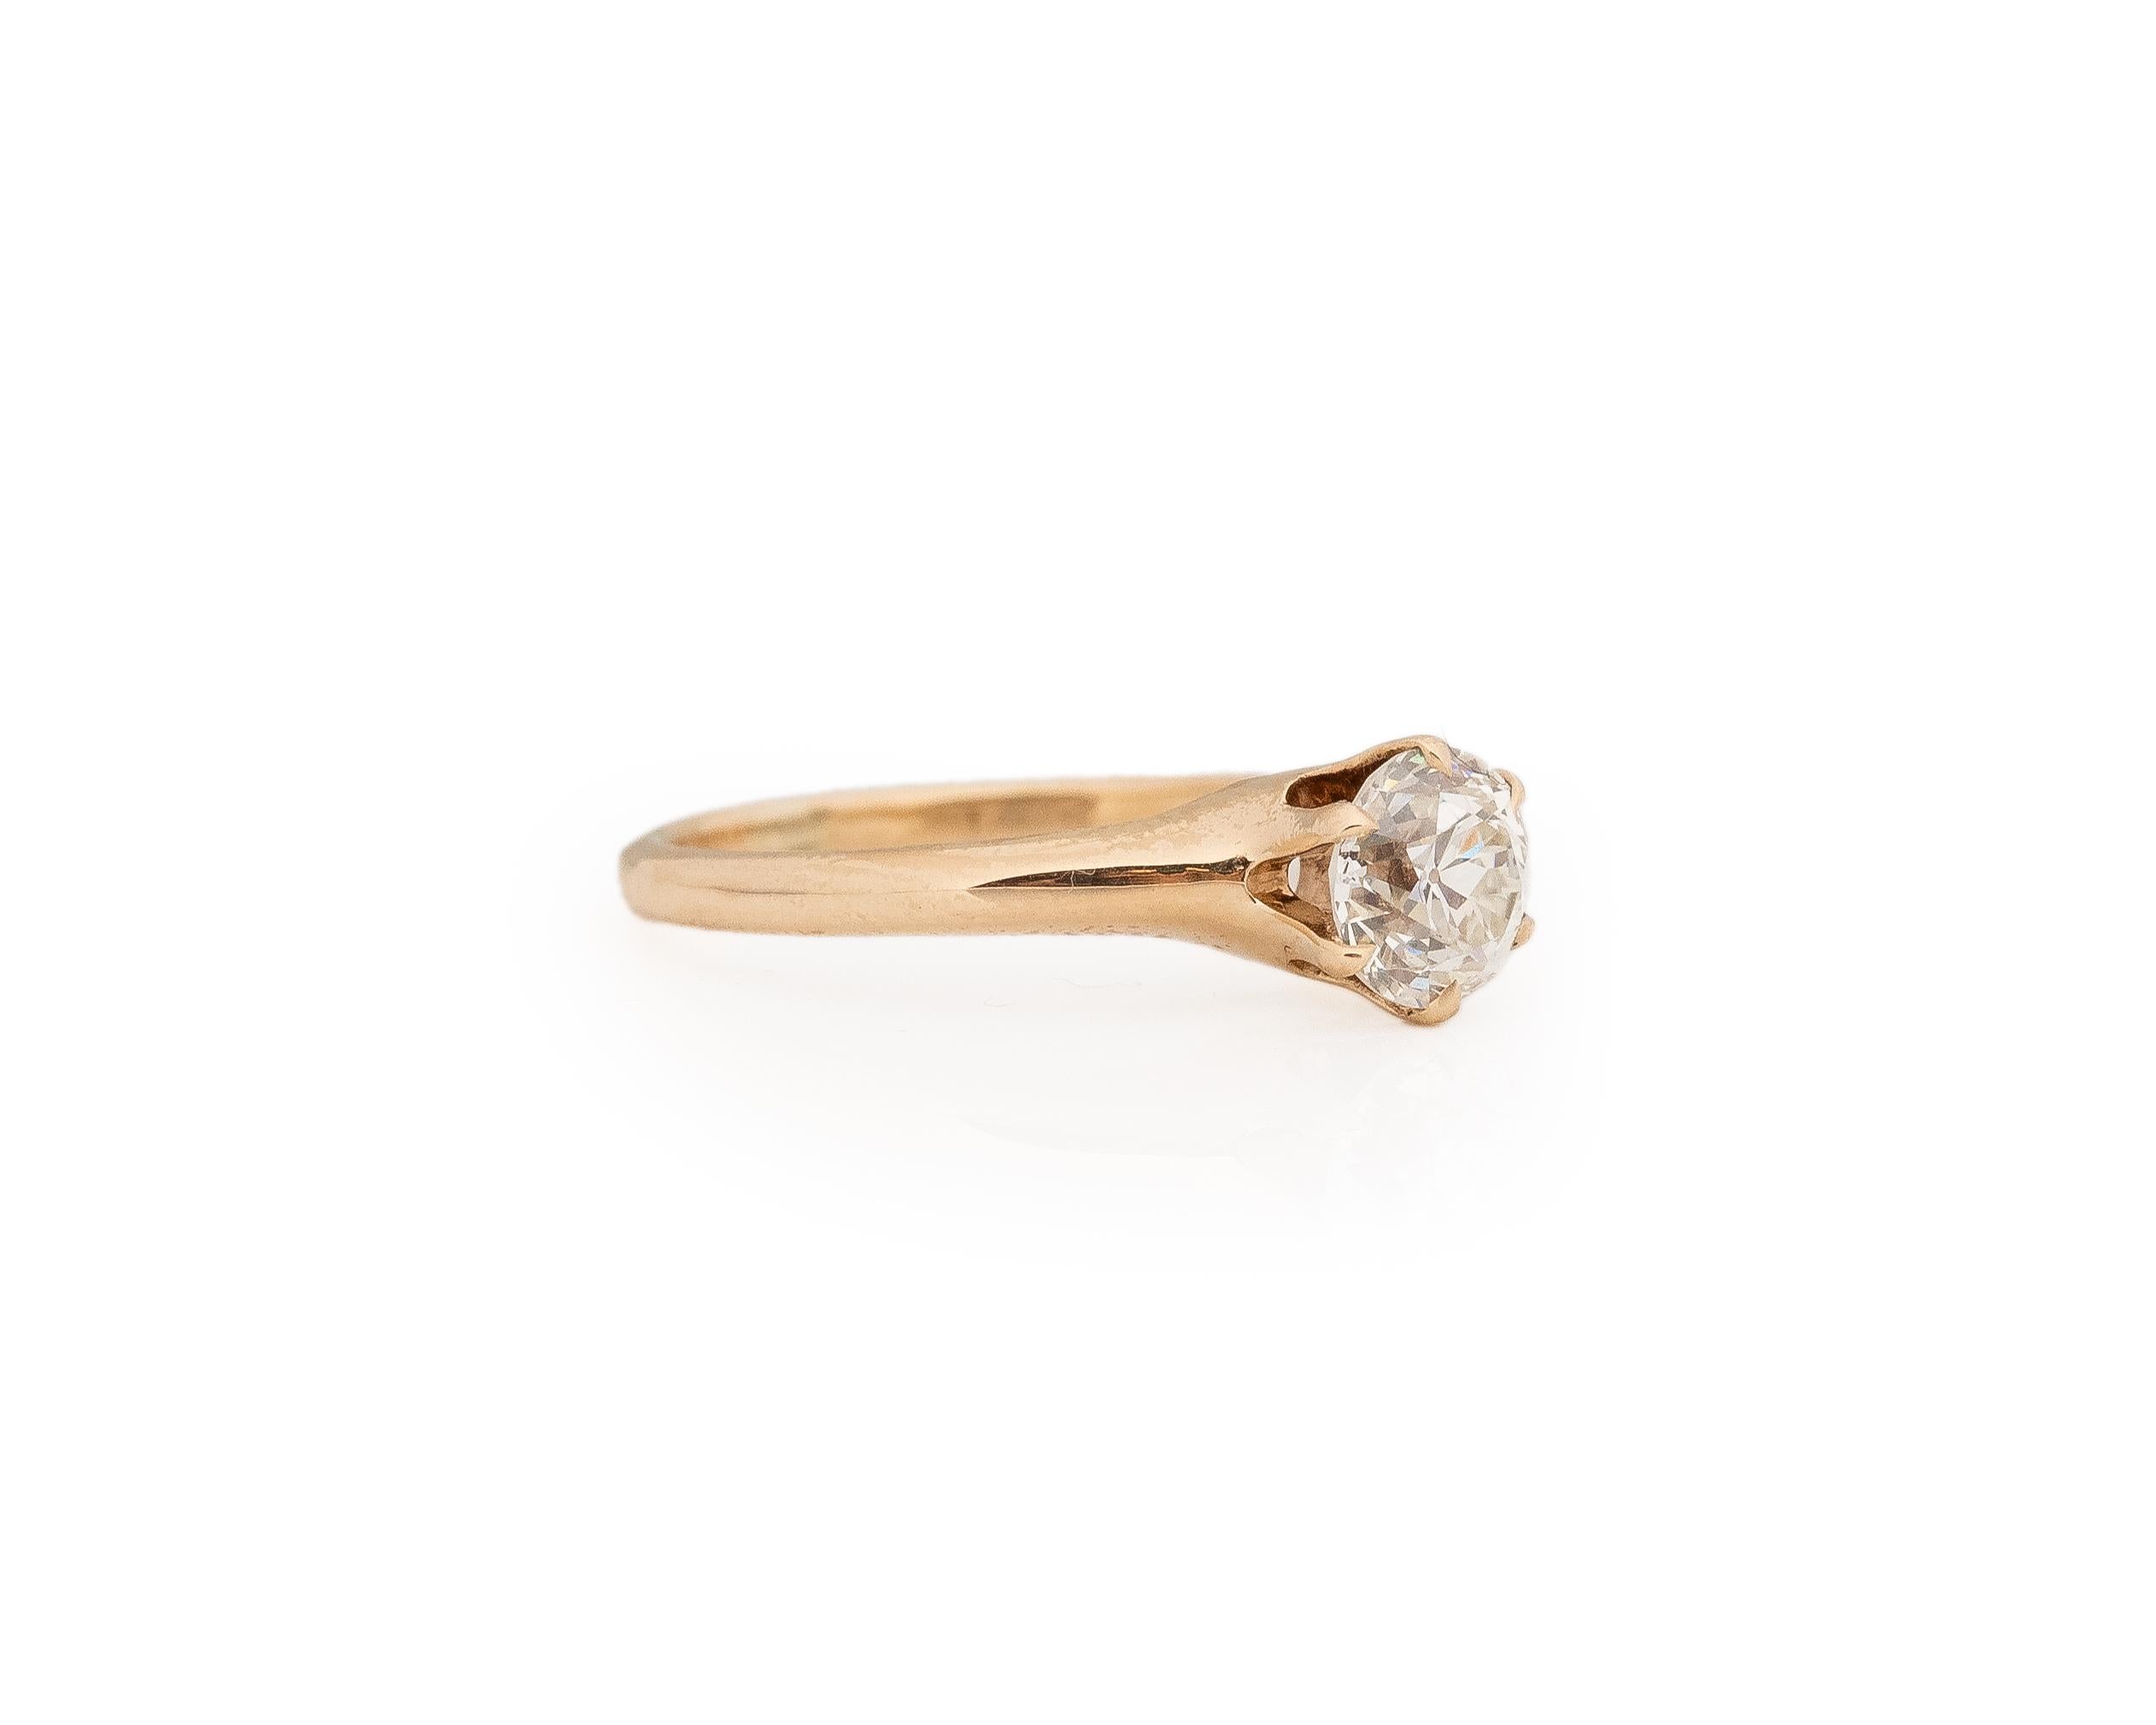 Year: 1900s

Item Details:
Ring Size: 5
Metal Type: 14K Yellow Gold [Hallmarked, and Tested]
Weight: 2.2 grams

Diamond Details:

GIA Report#:5231074874
Weight: 82ct total weight
Cut: Old European brilliant
Color: J
Clarity: SI1
Type: